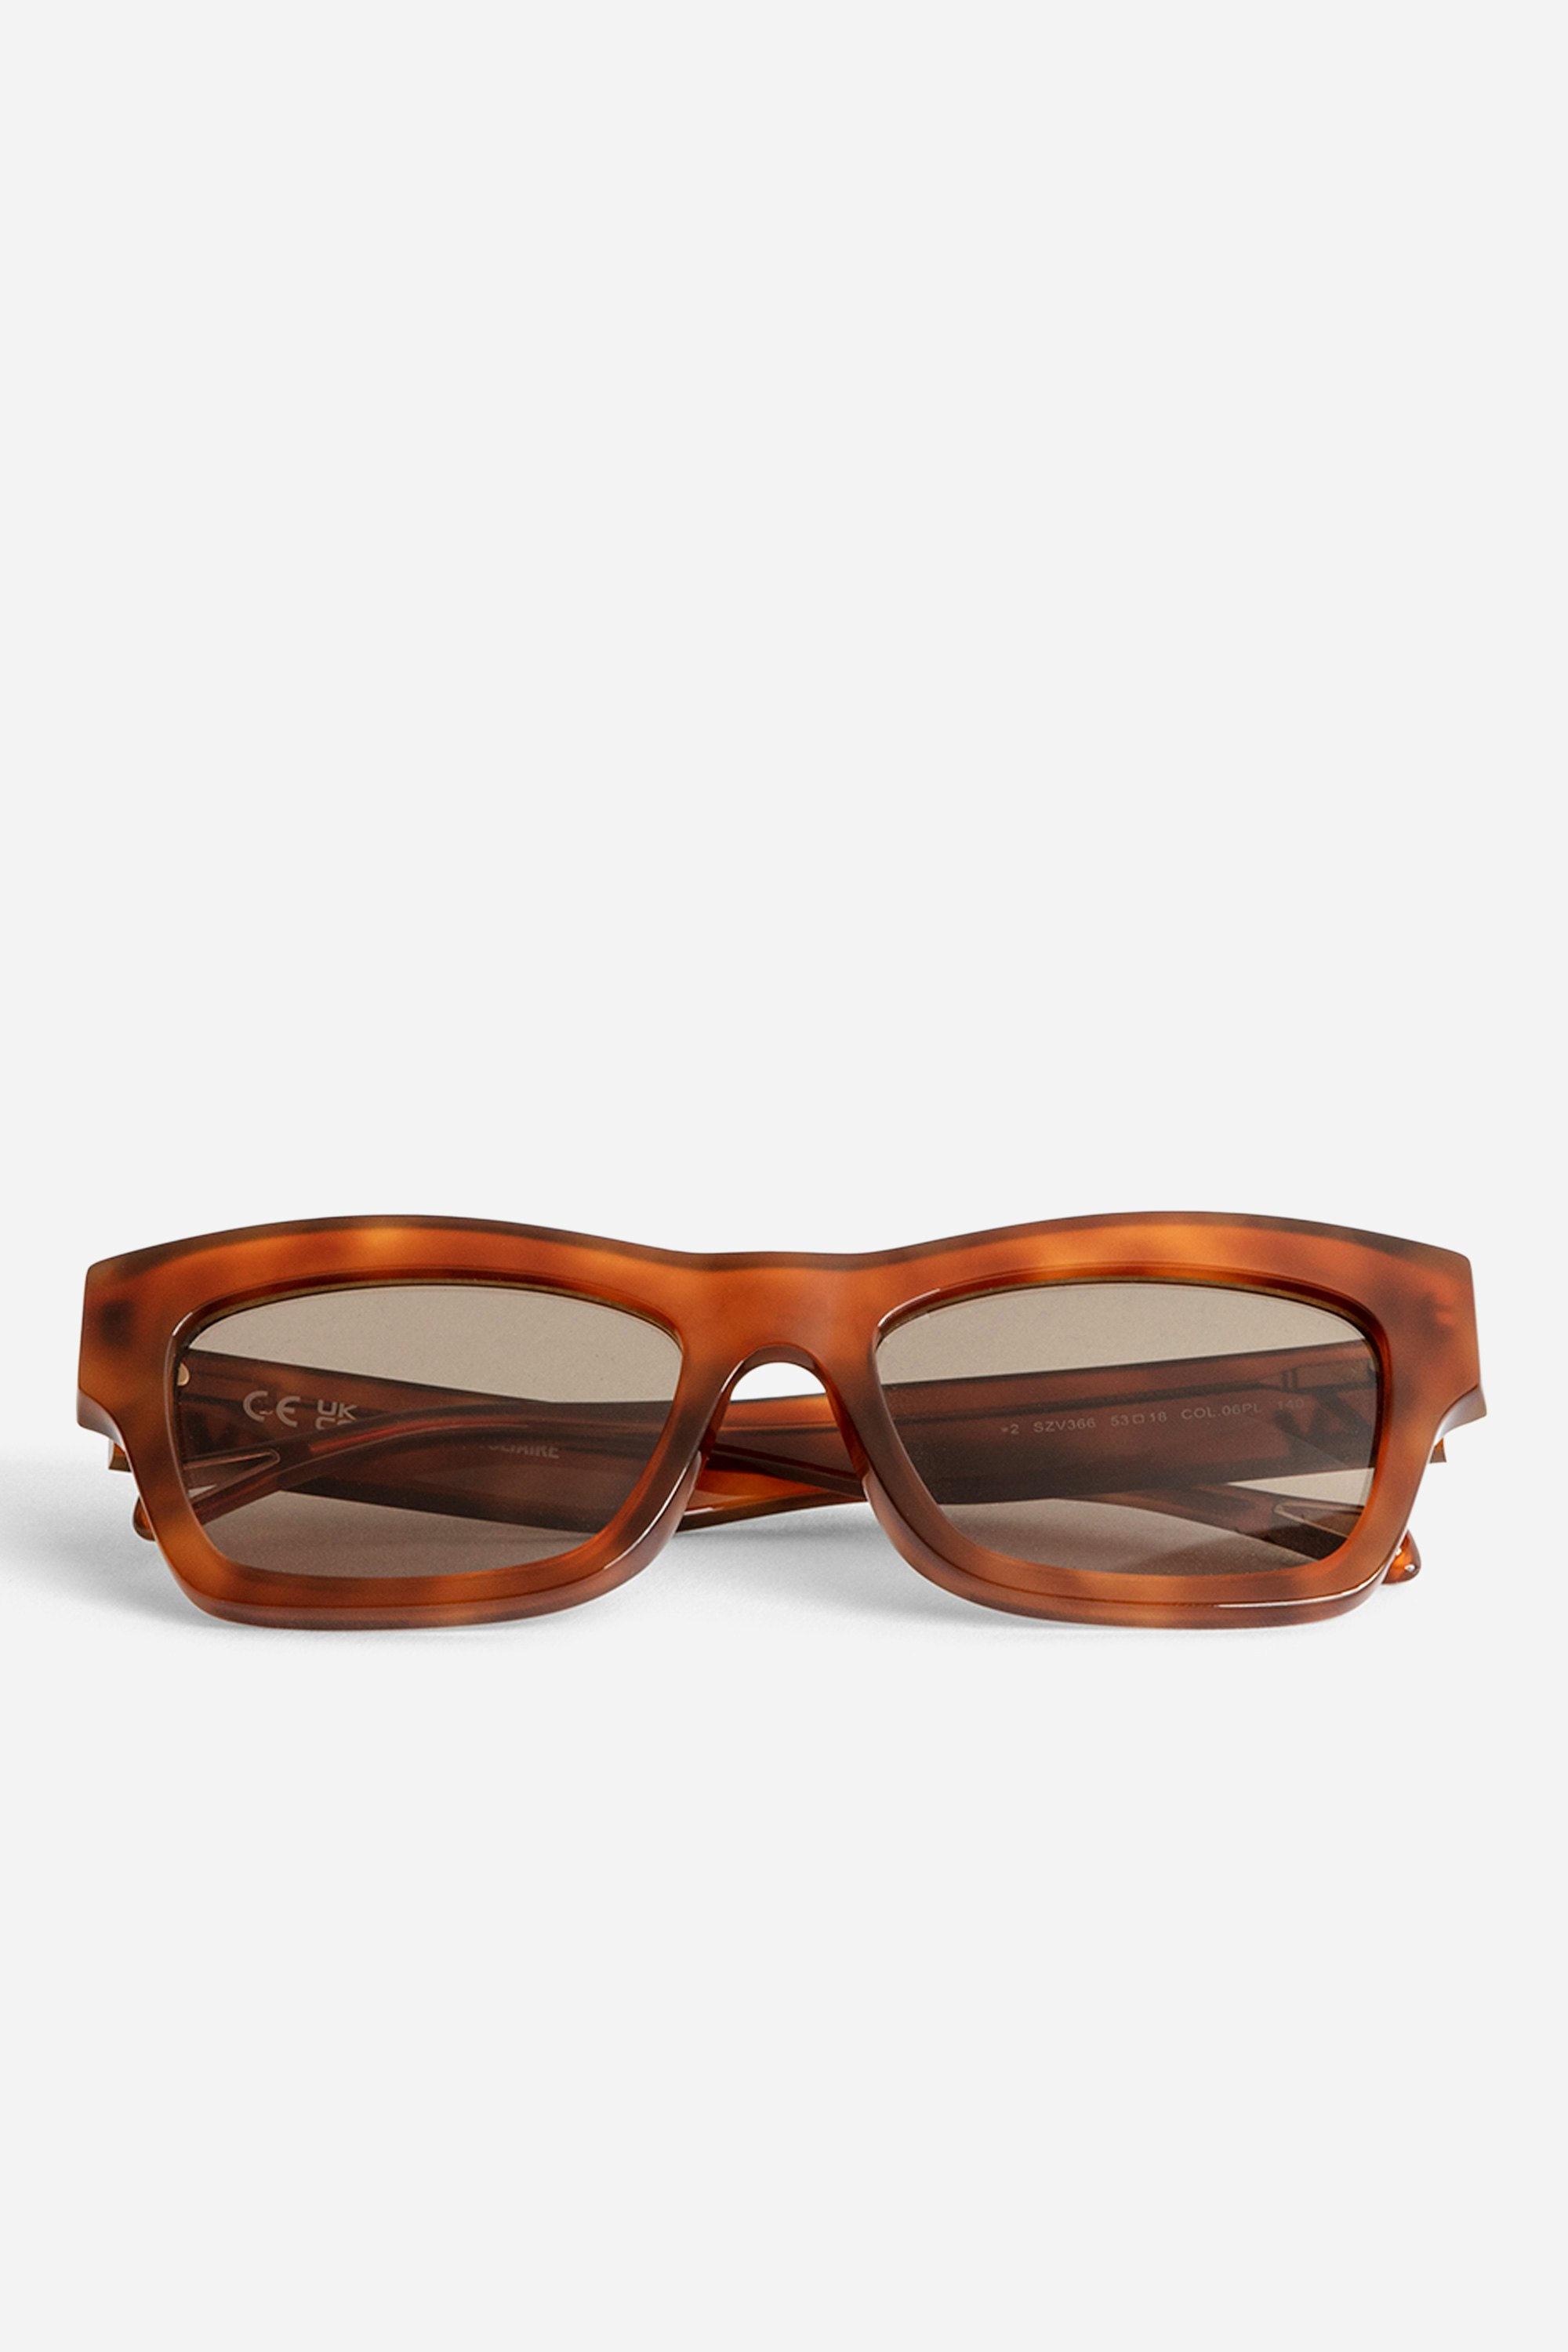 ZV23H1 Sunglasses Unisex brown rectangular sunglasses with the ZV logo on the temples.